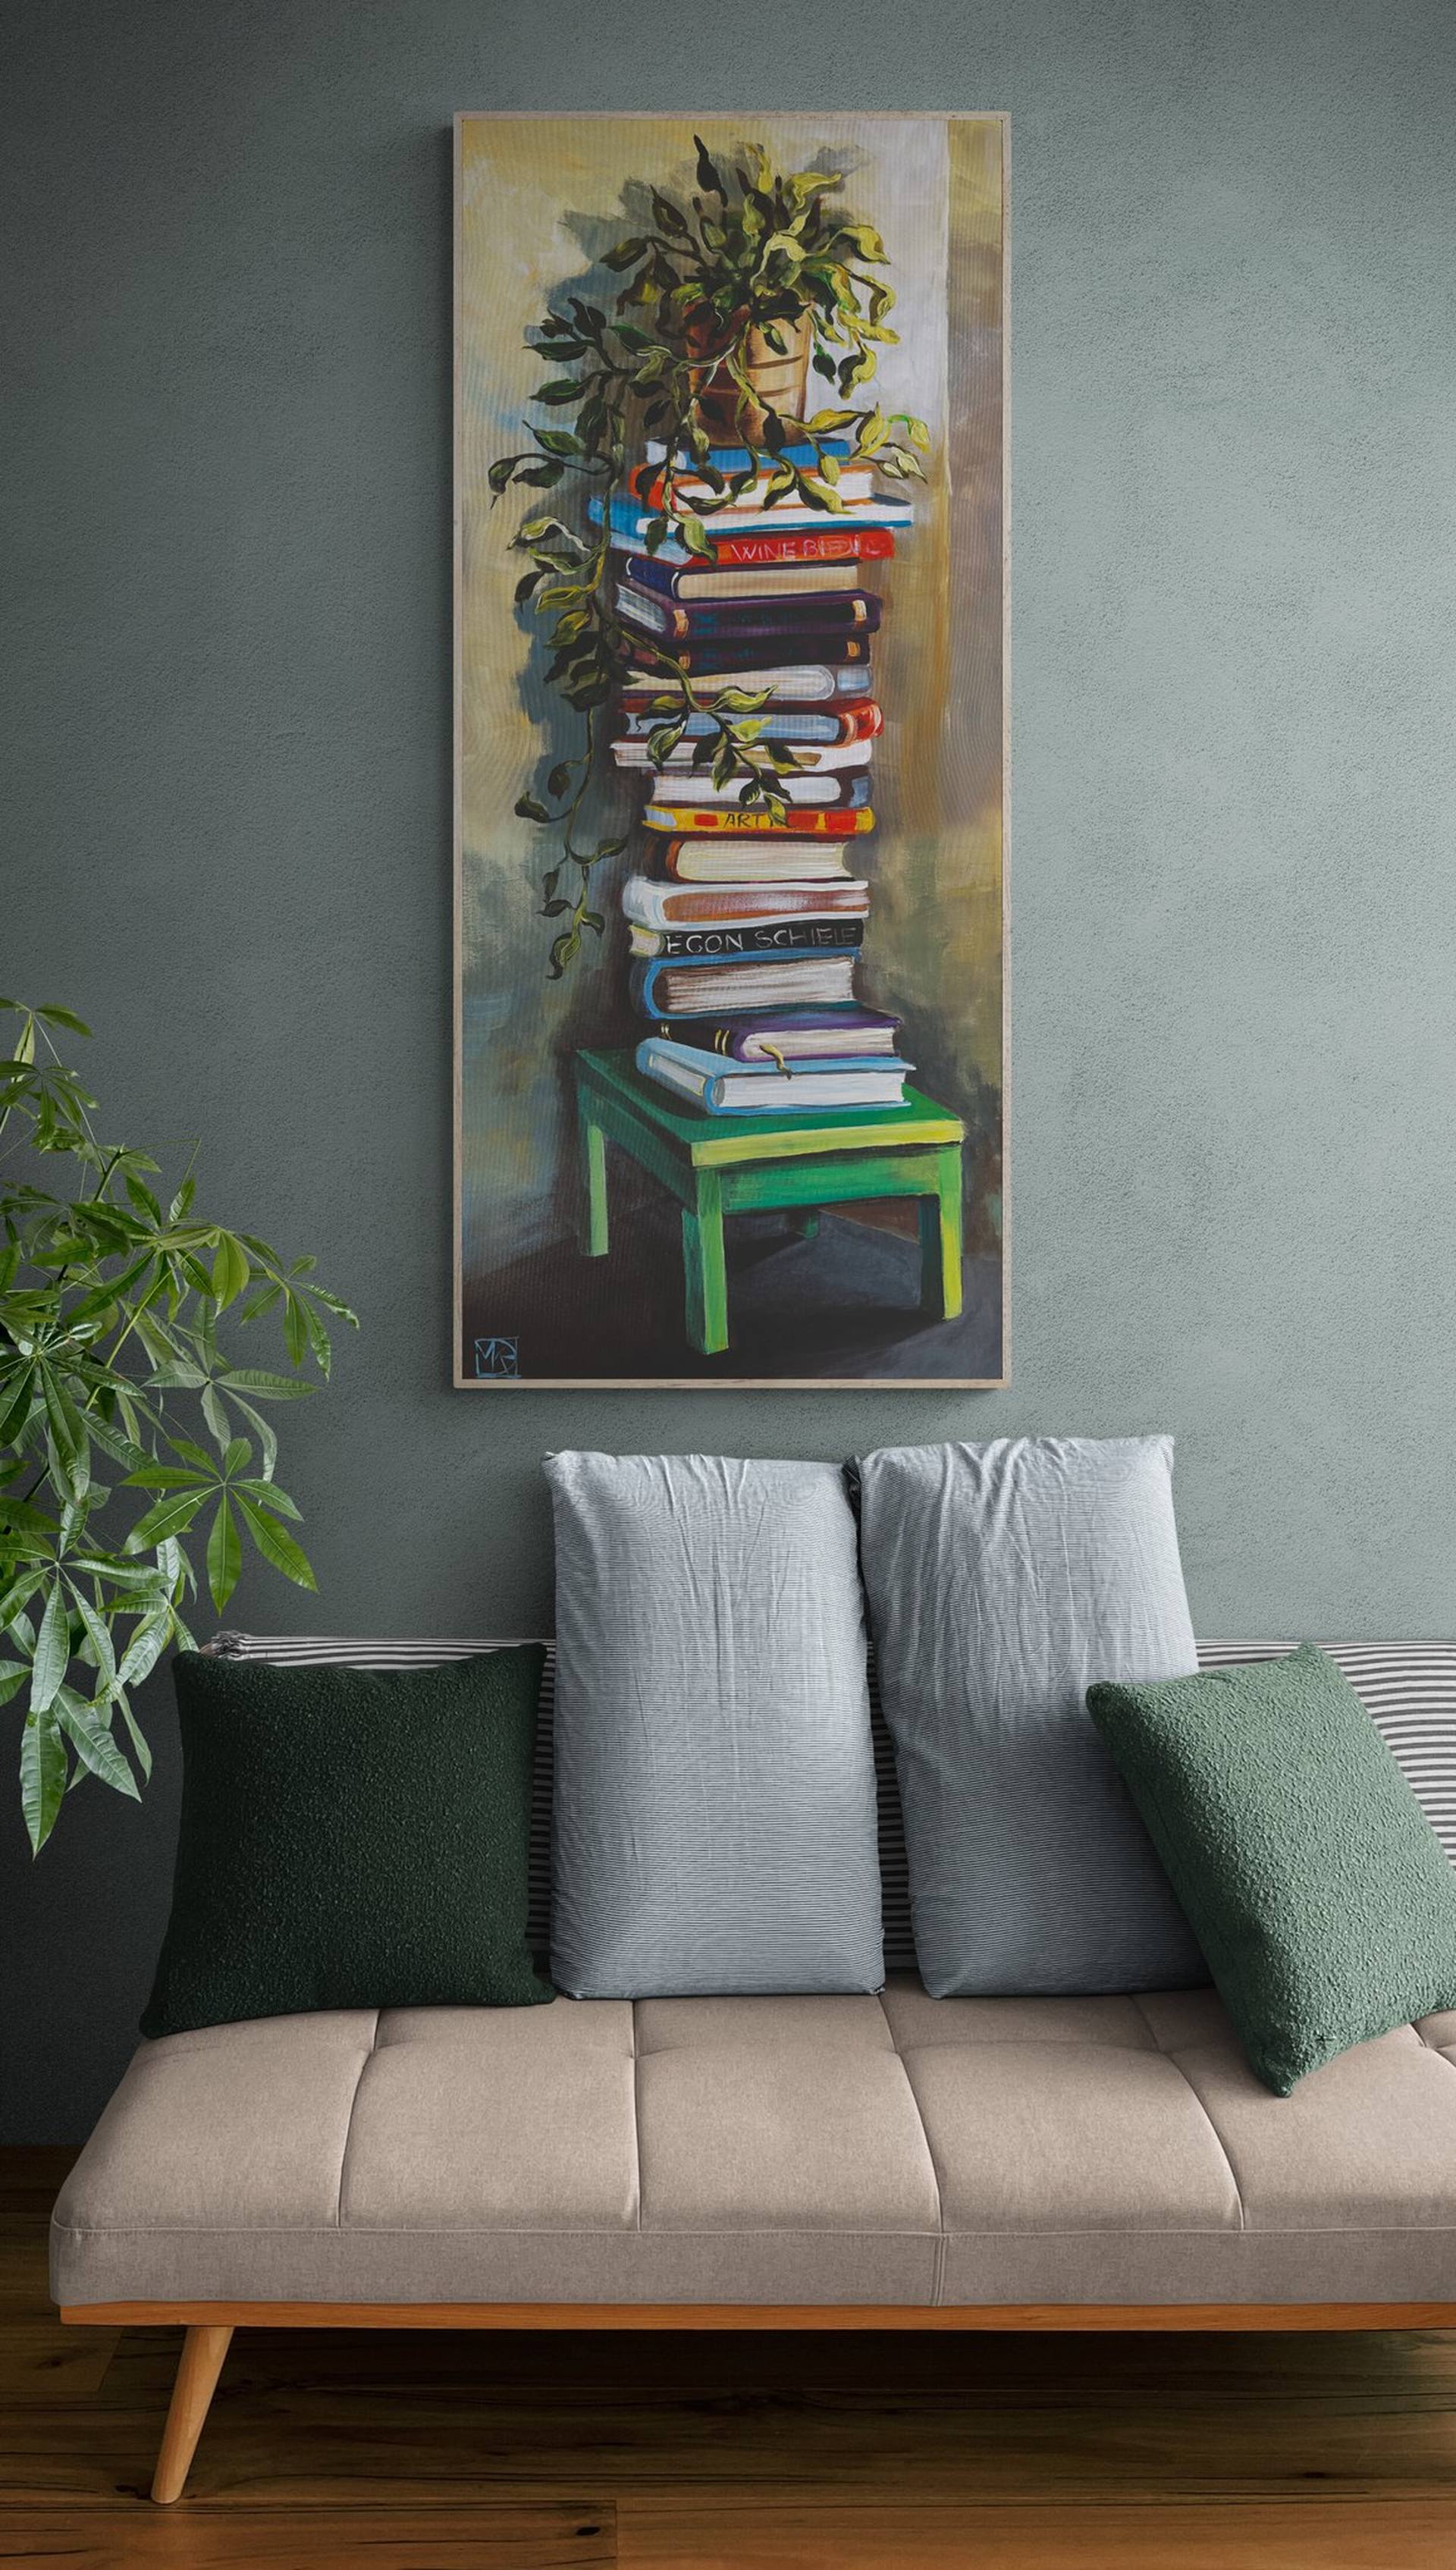 Still life with books and plants Acrylic painting by Maria Kireev